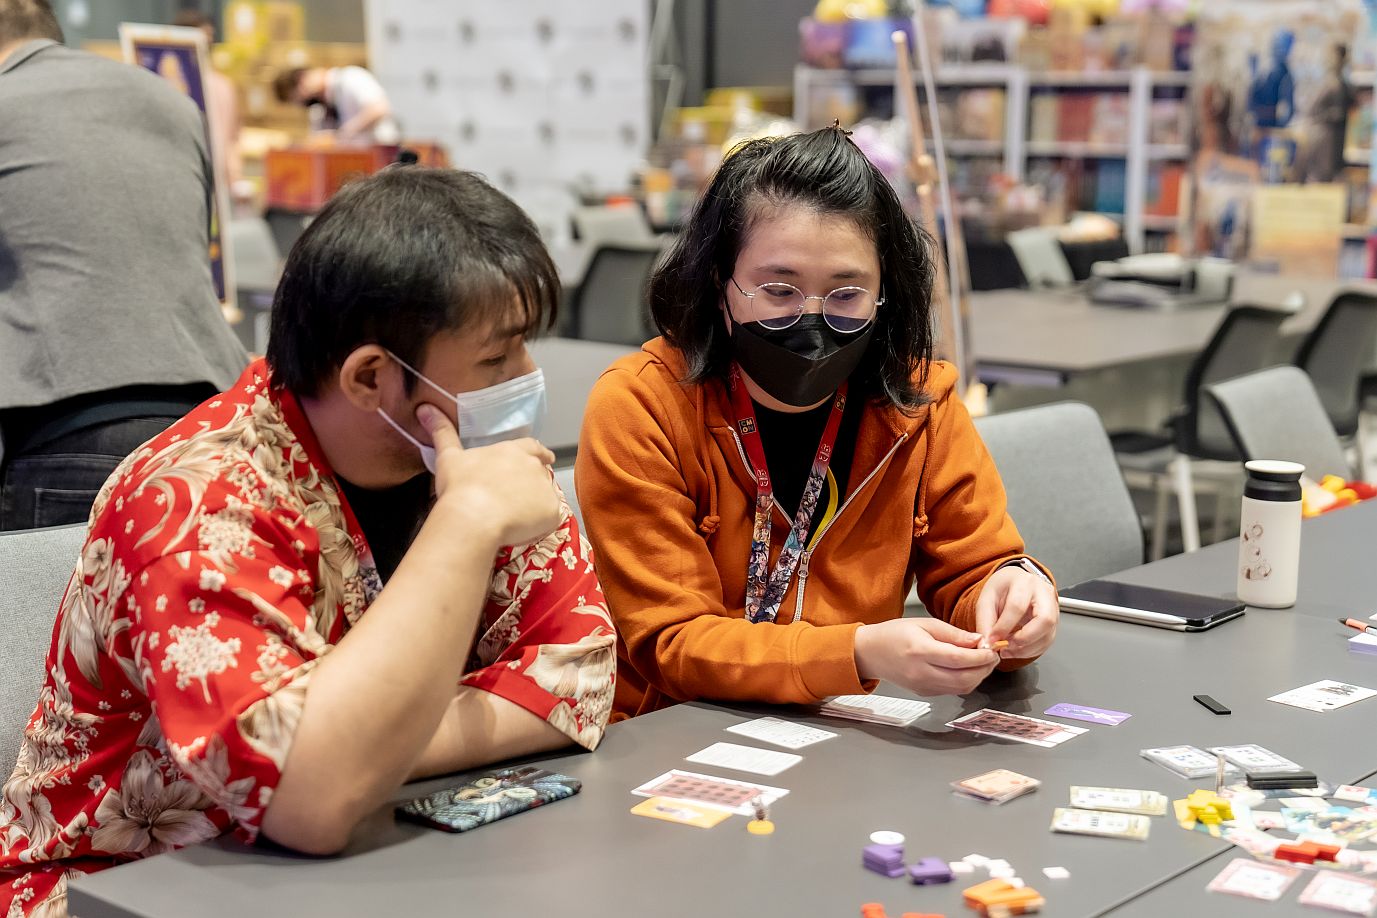 Meet Game Designers and Win Exclusive Prizes at This Fun Board Game